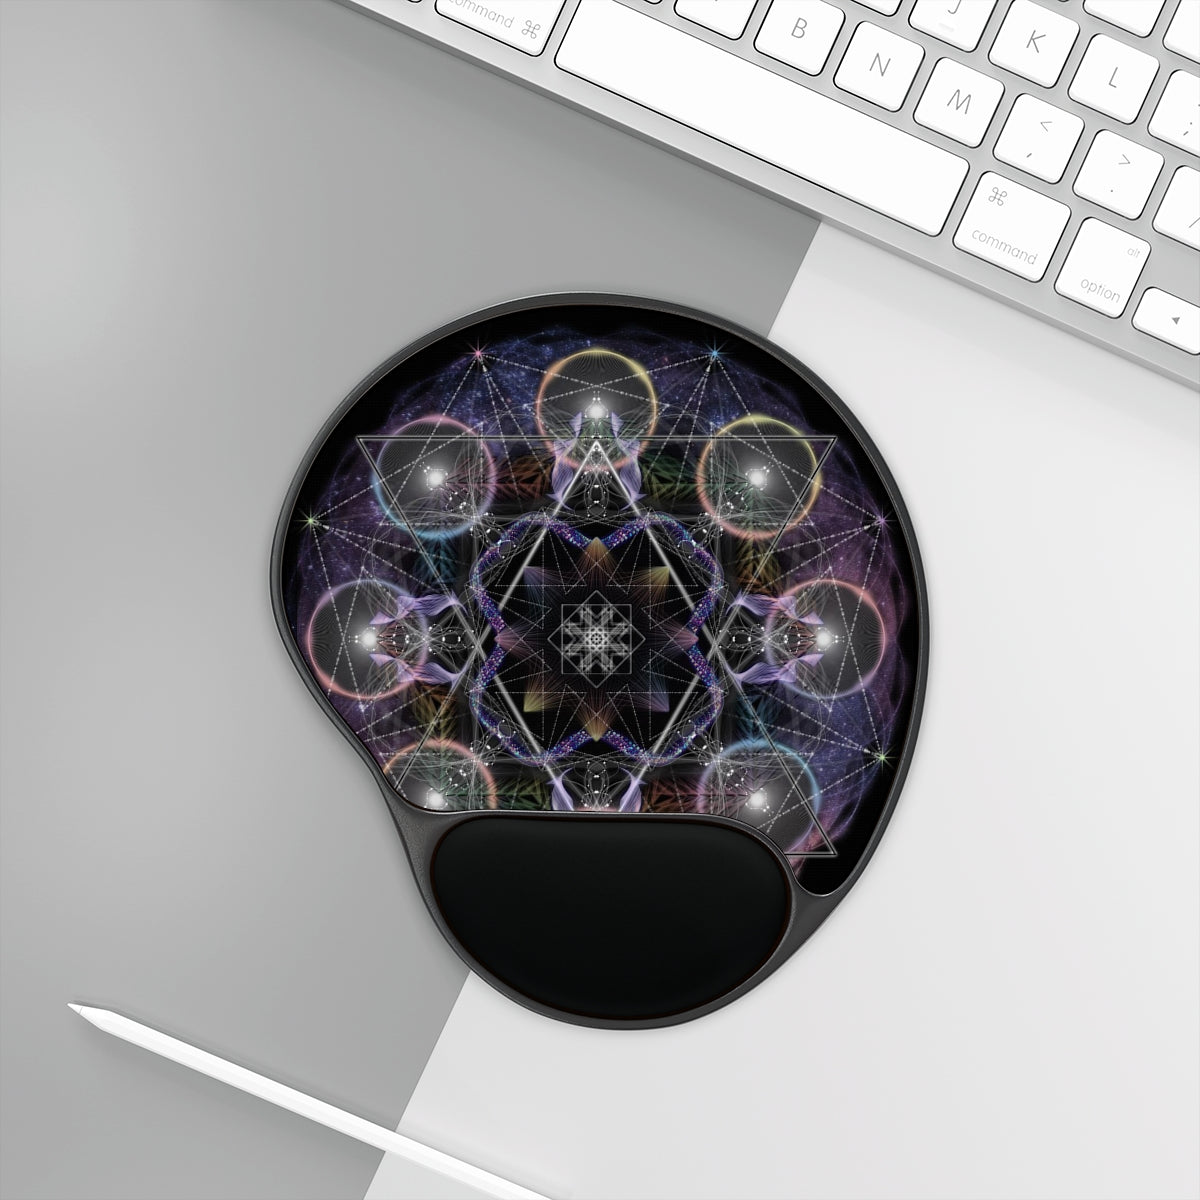 Space Mandala Mouse Pad With Wrist Rest